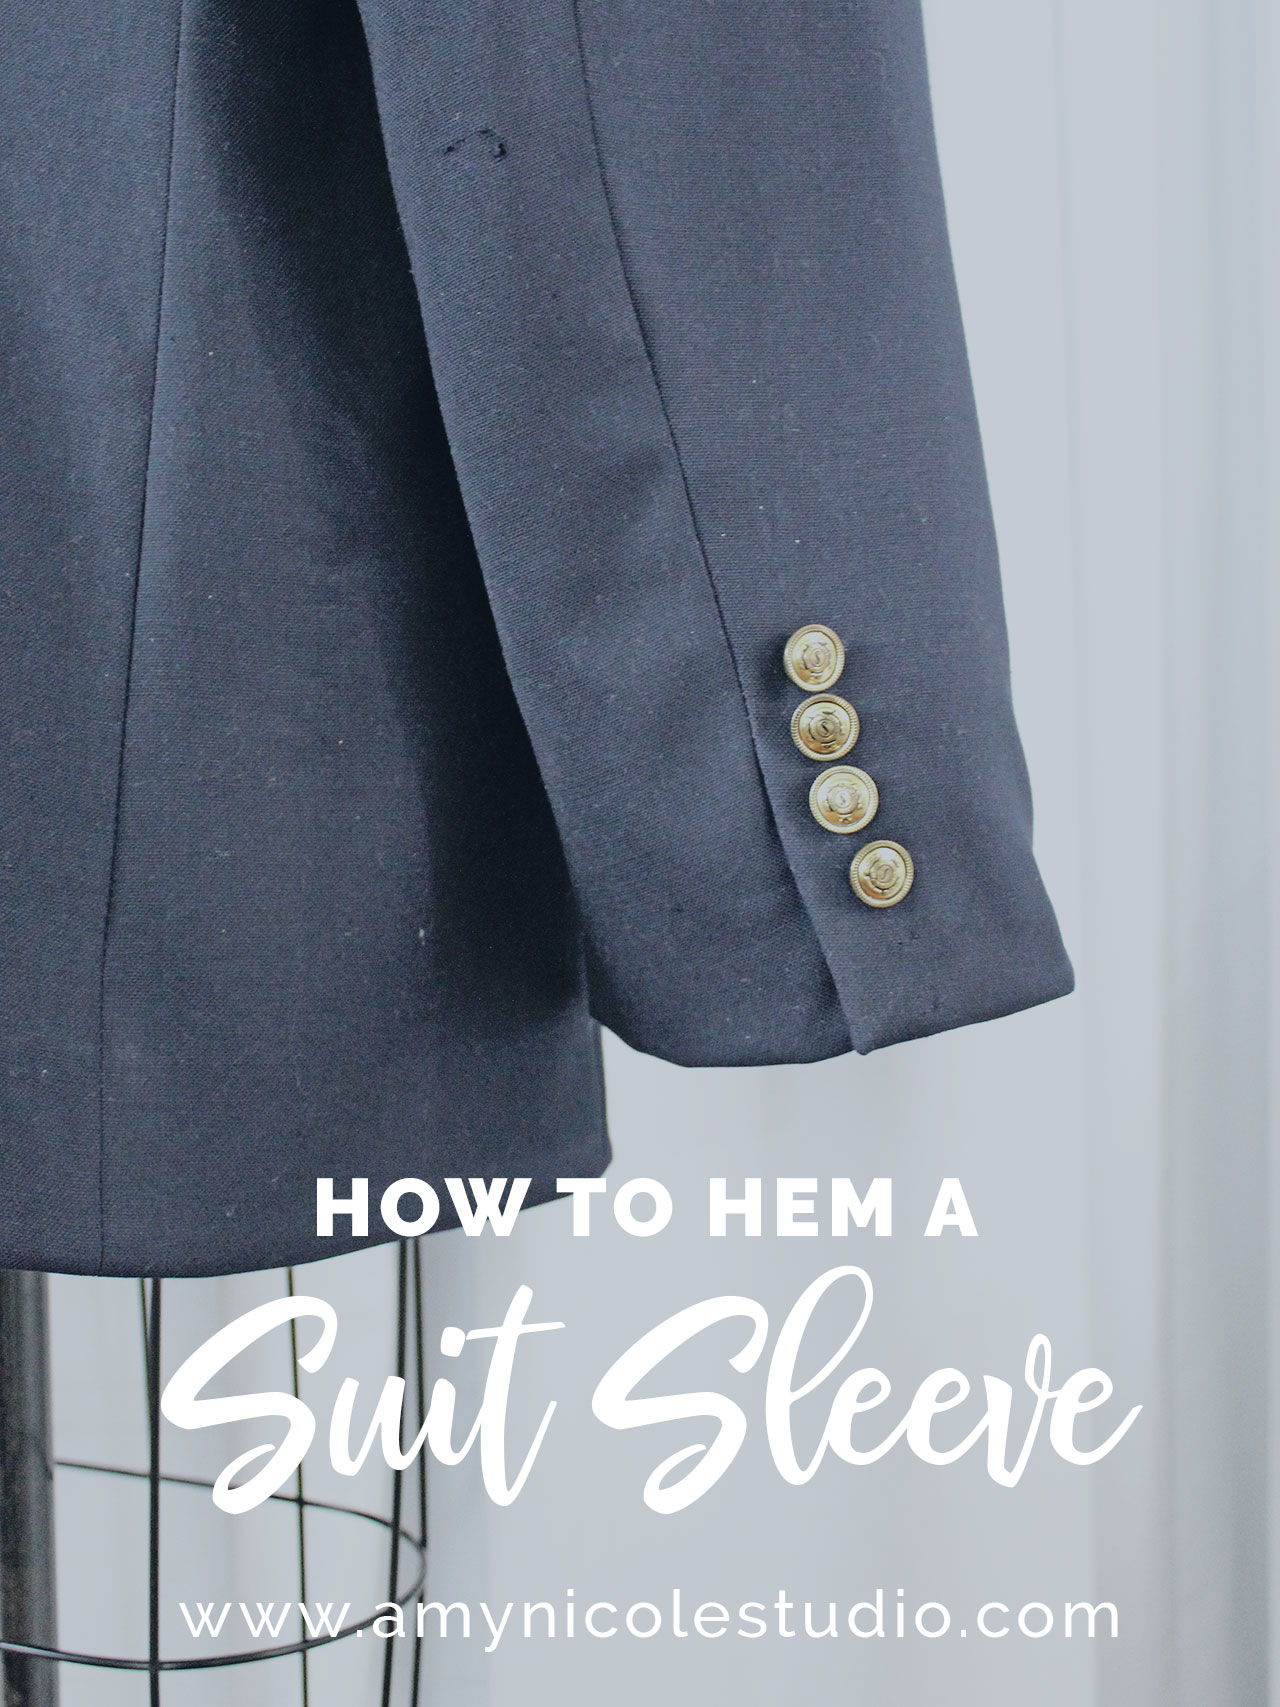 Sleeve Hem Button Options for Jackets and Suits - Proper Cloth Help